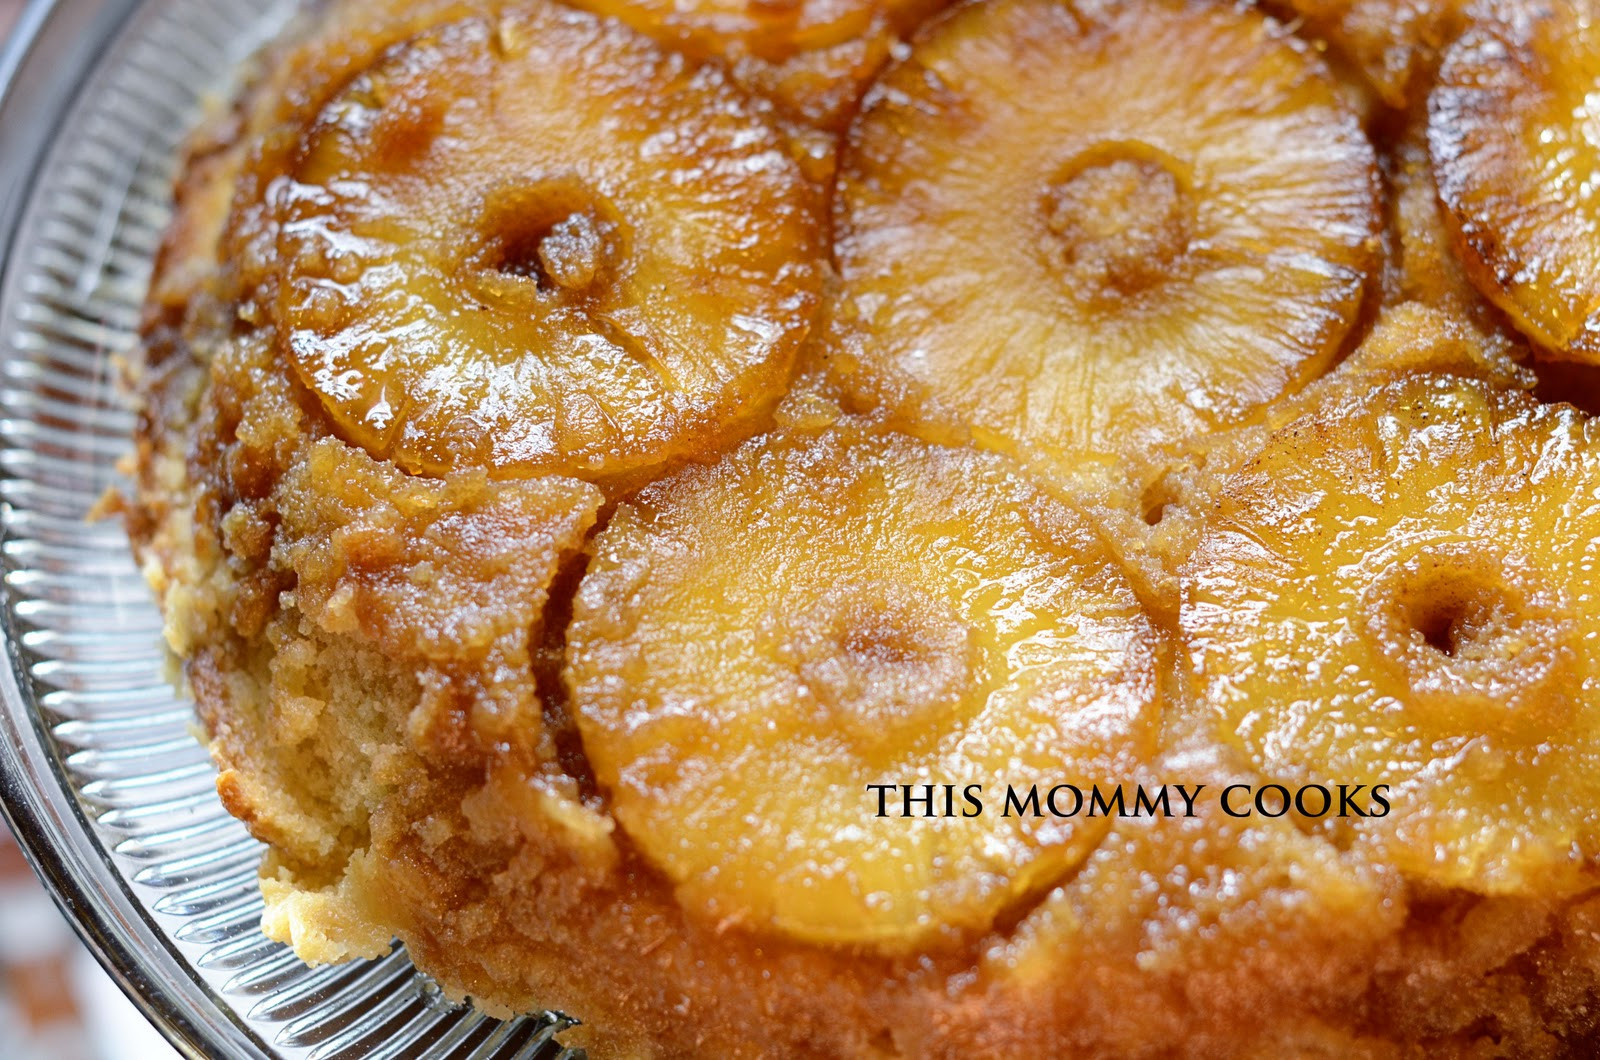 Cast Iron Pineapple Upside Down Cake
 This Mommy Cooks Pineapple Upside Down Cake in cast iron